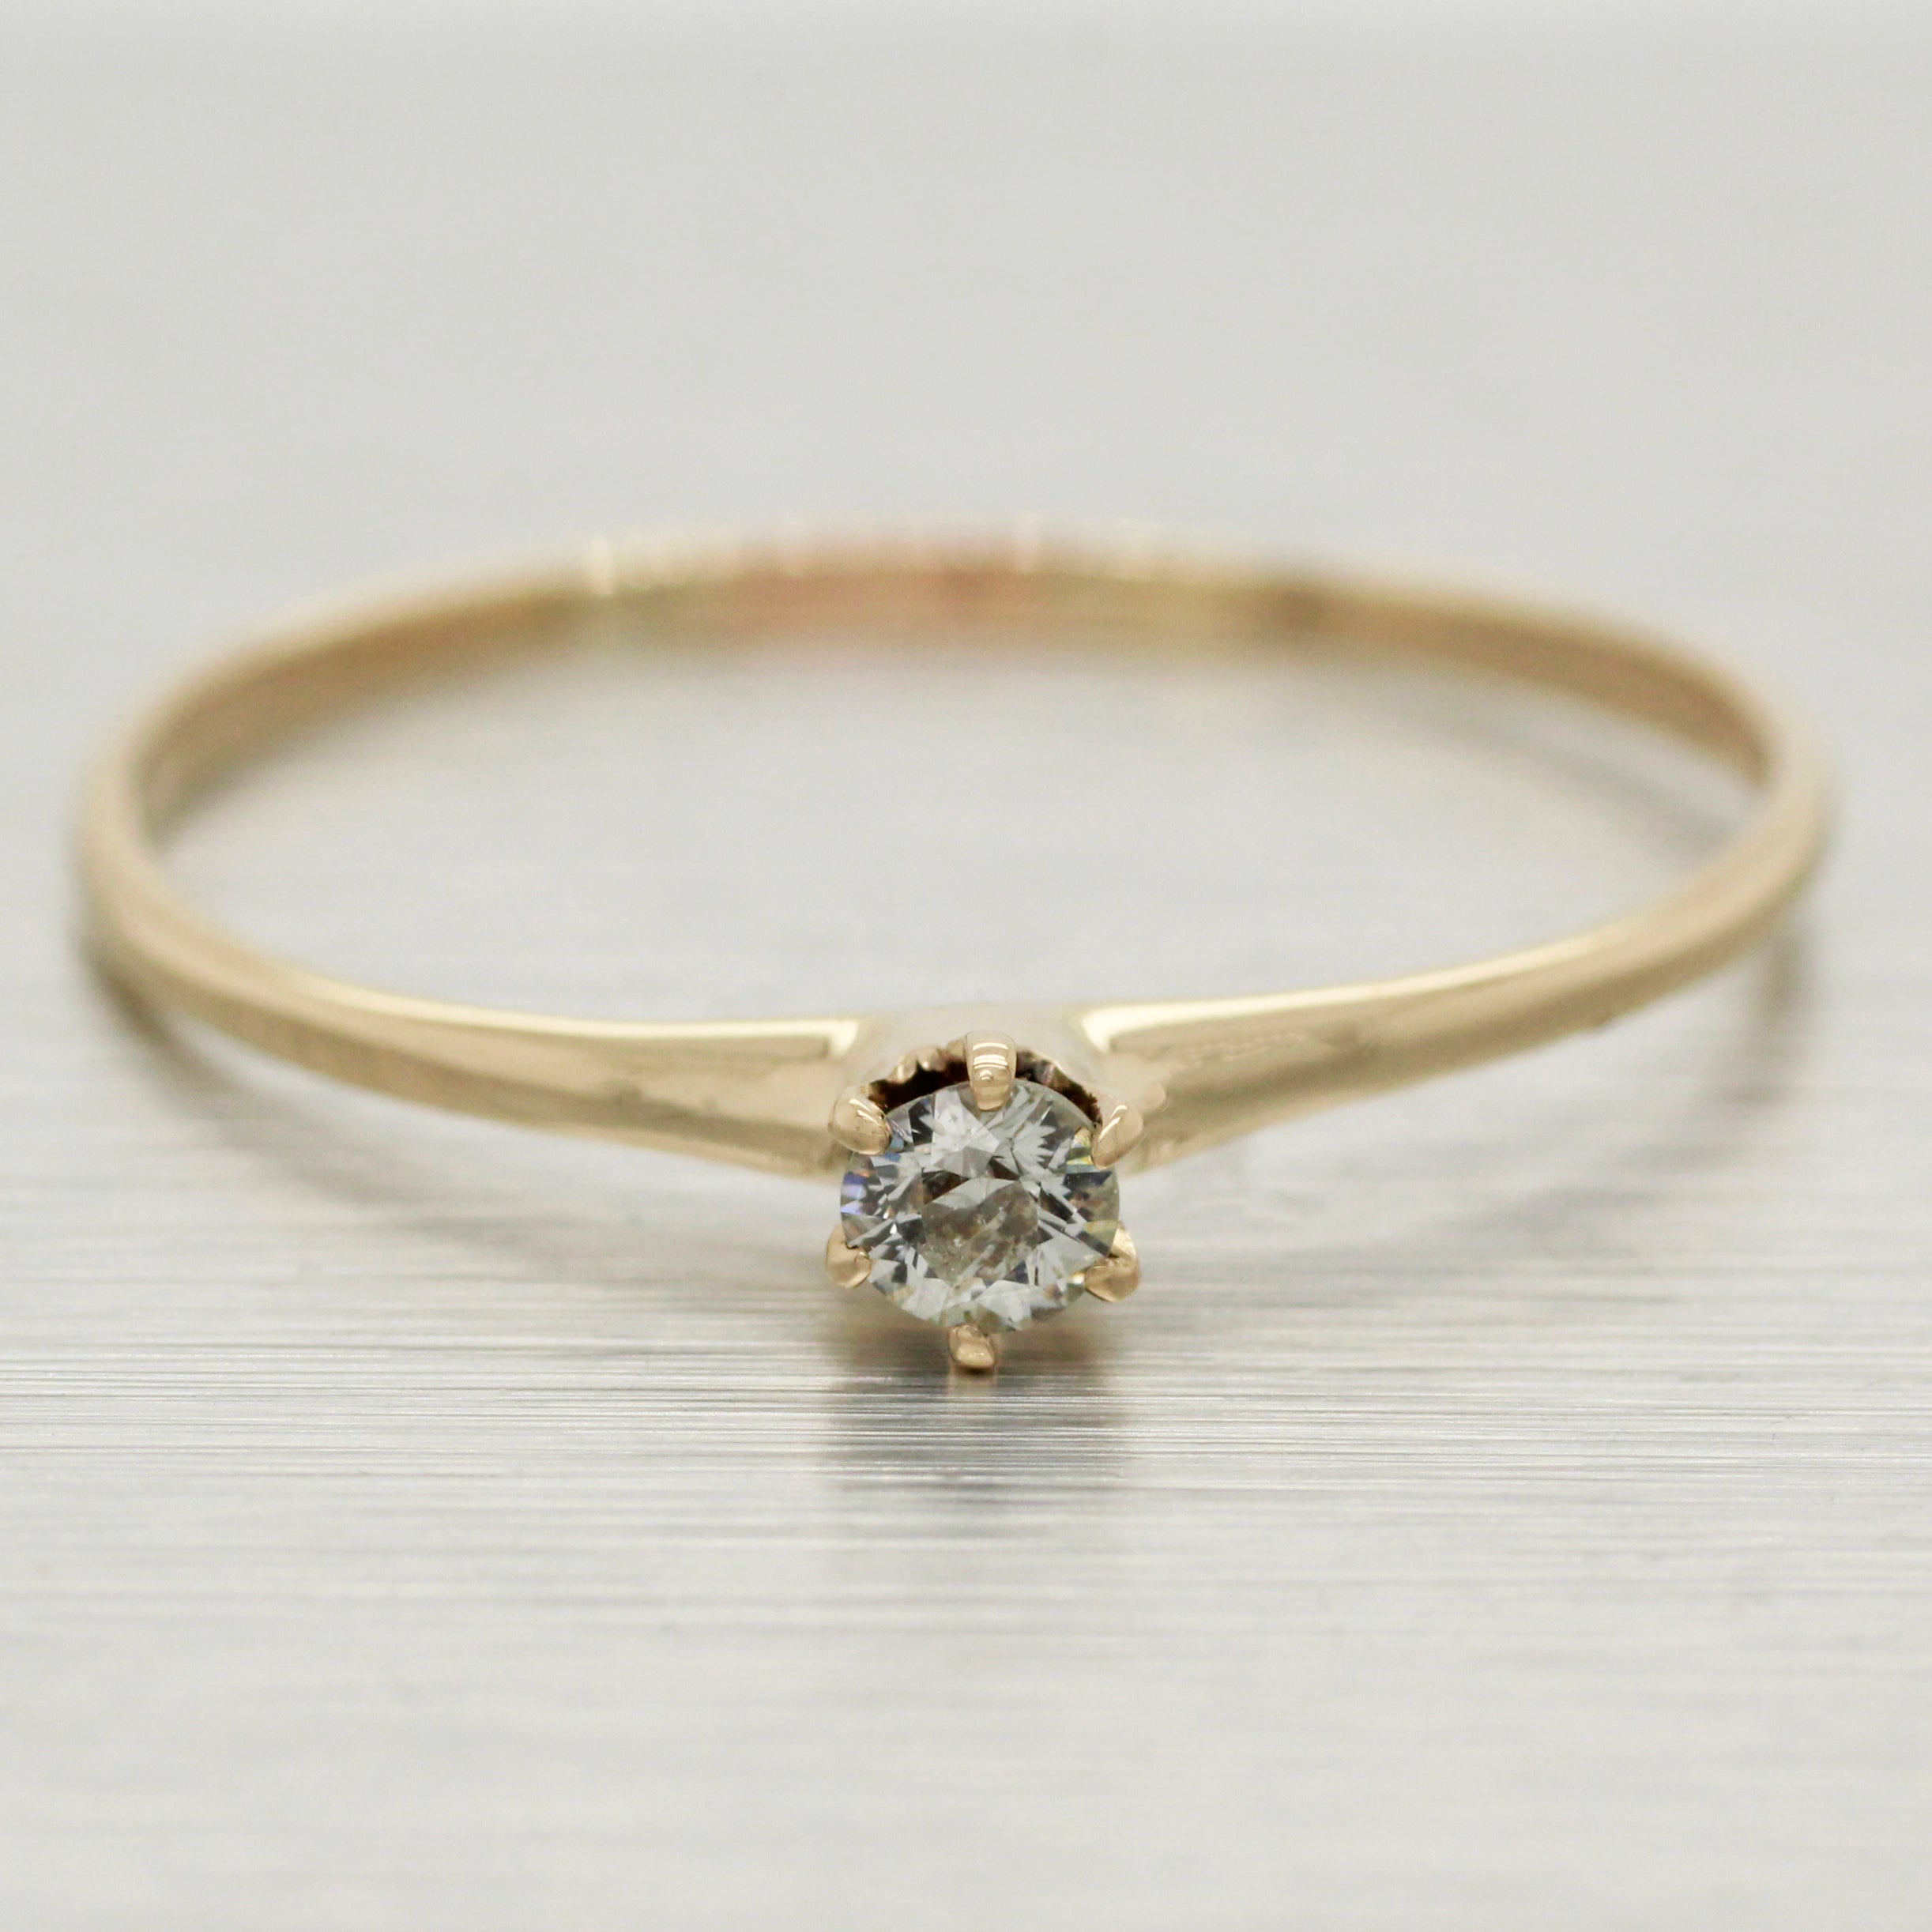 Vintage 0.10ct Round Diamond Solitaire Engagement Ring - 14k Yellow Gold